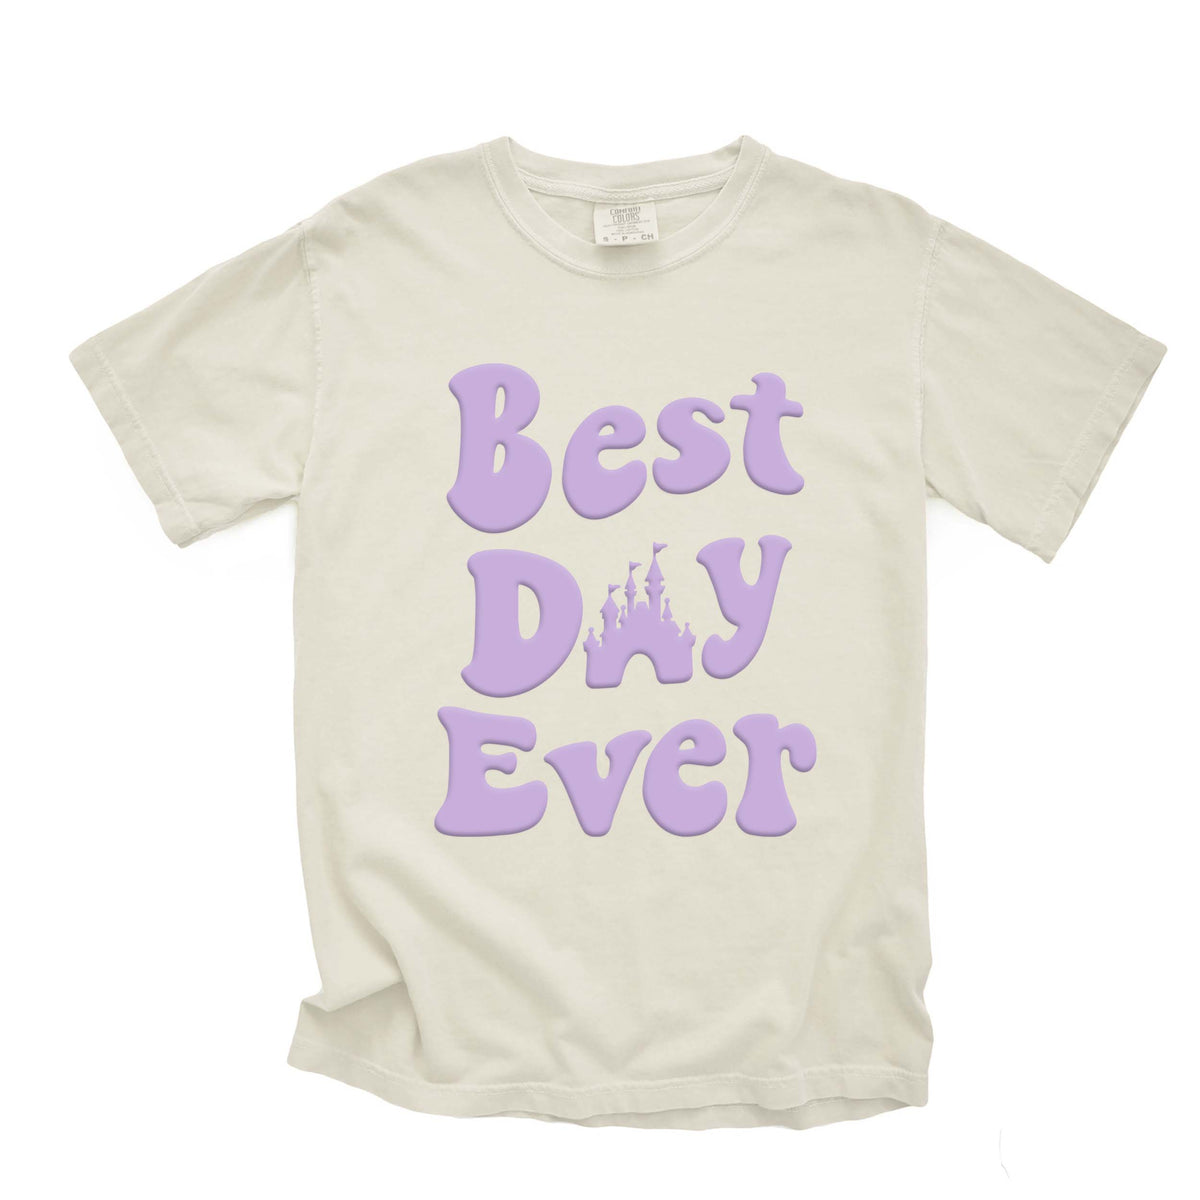 Best Day Ever Embossed Tee - Lilac Puff Print